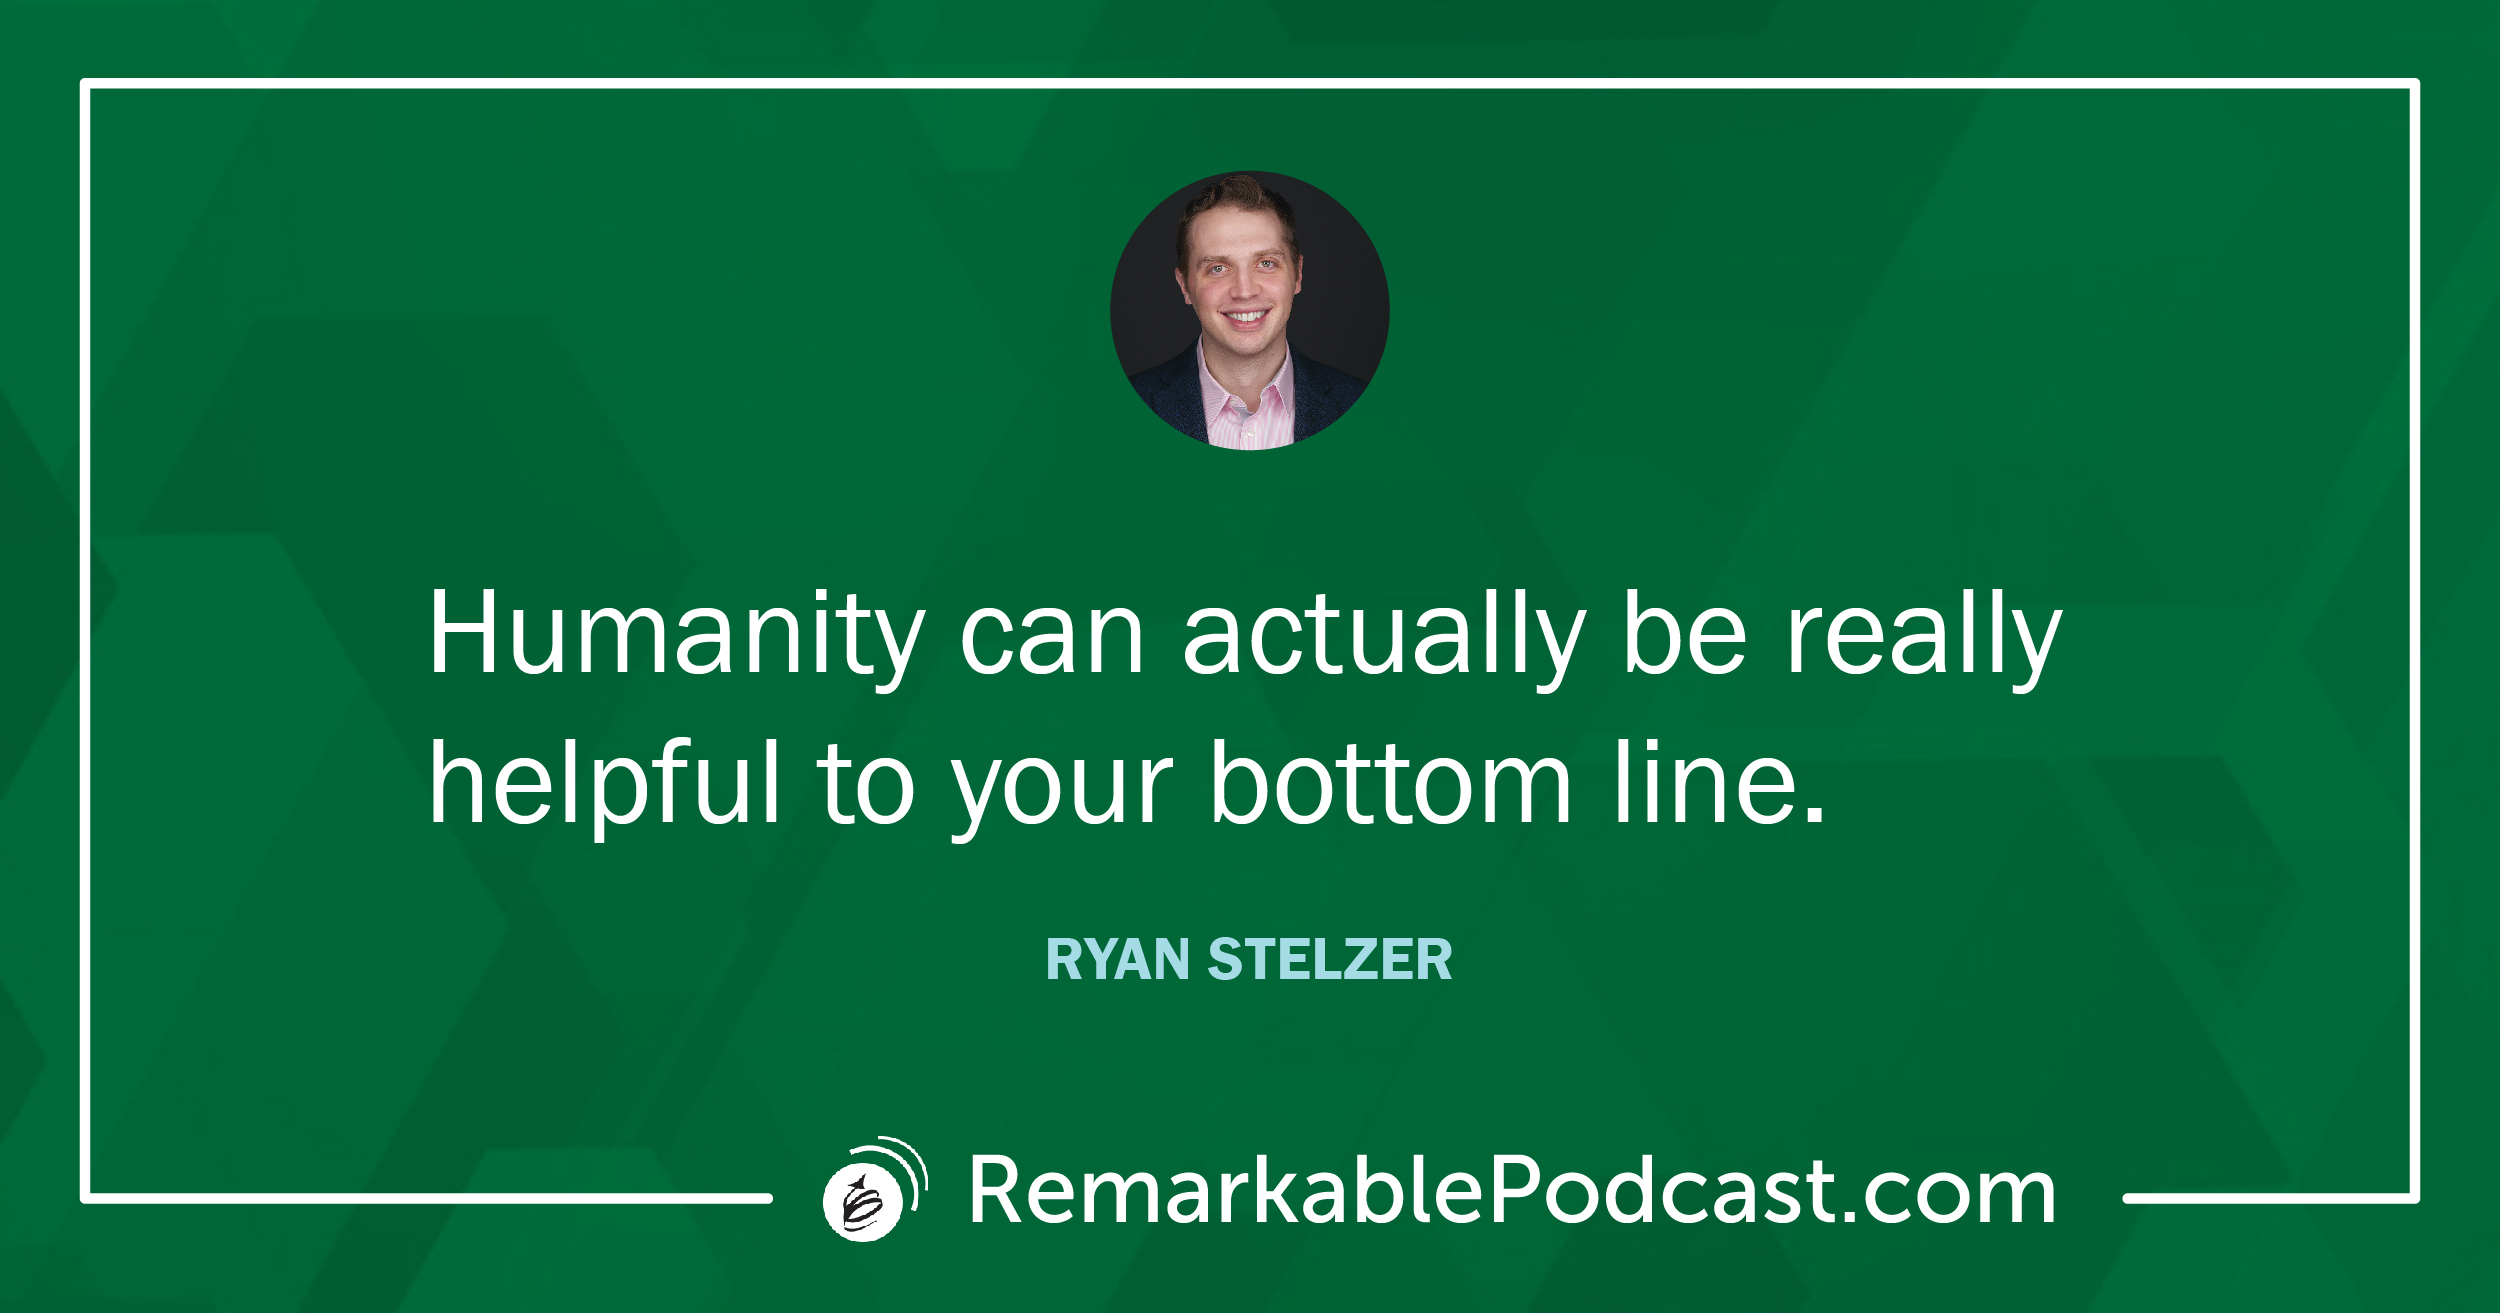 Quote Image: Humanity can actually be really helpful to your bottom line. Said by Ryan Stelzer